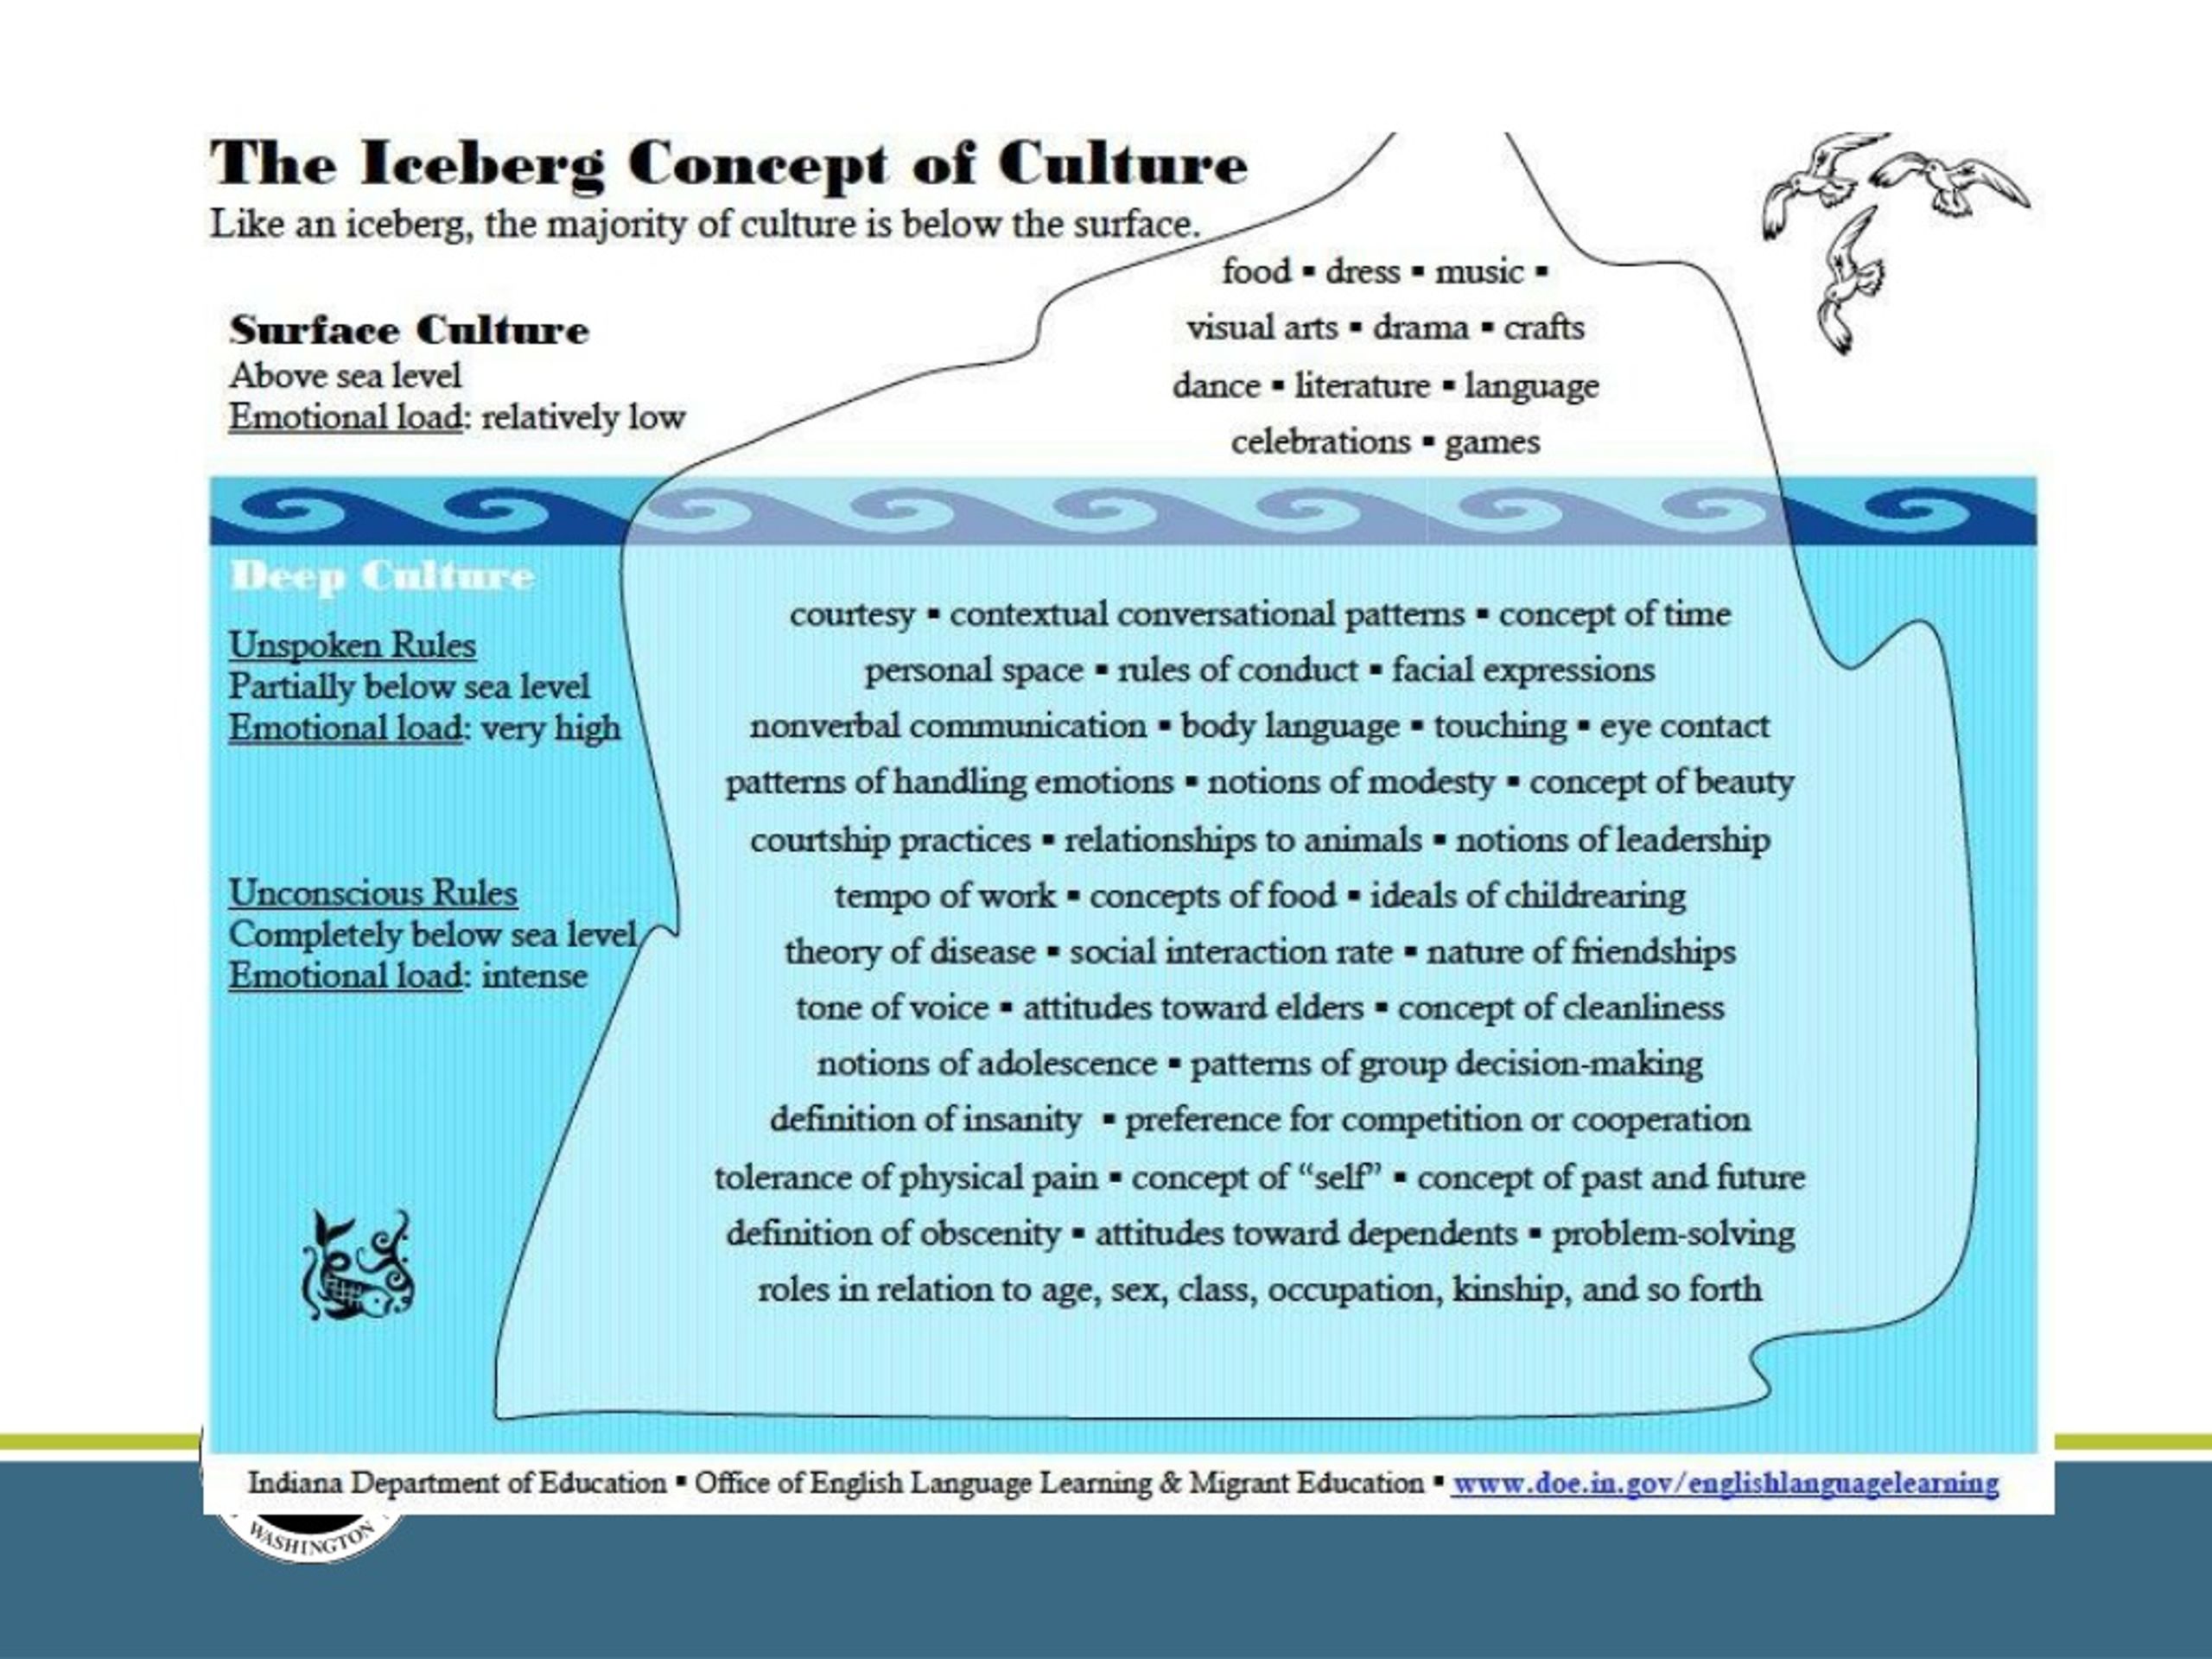 Below the surface текст. The Iceberg Concept of Culture. Cultural Iceberg. Cultural Iceberg Theory. Iceberg model of Culture.